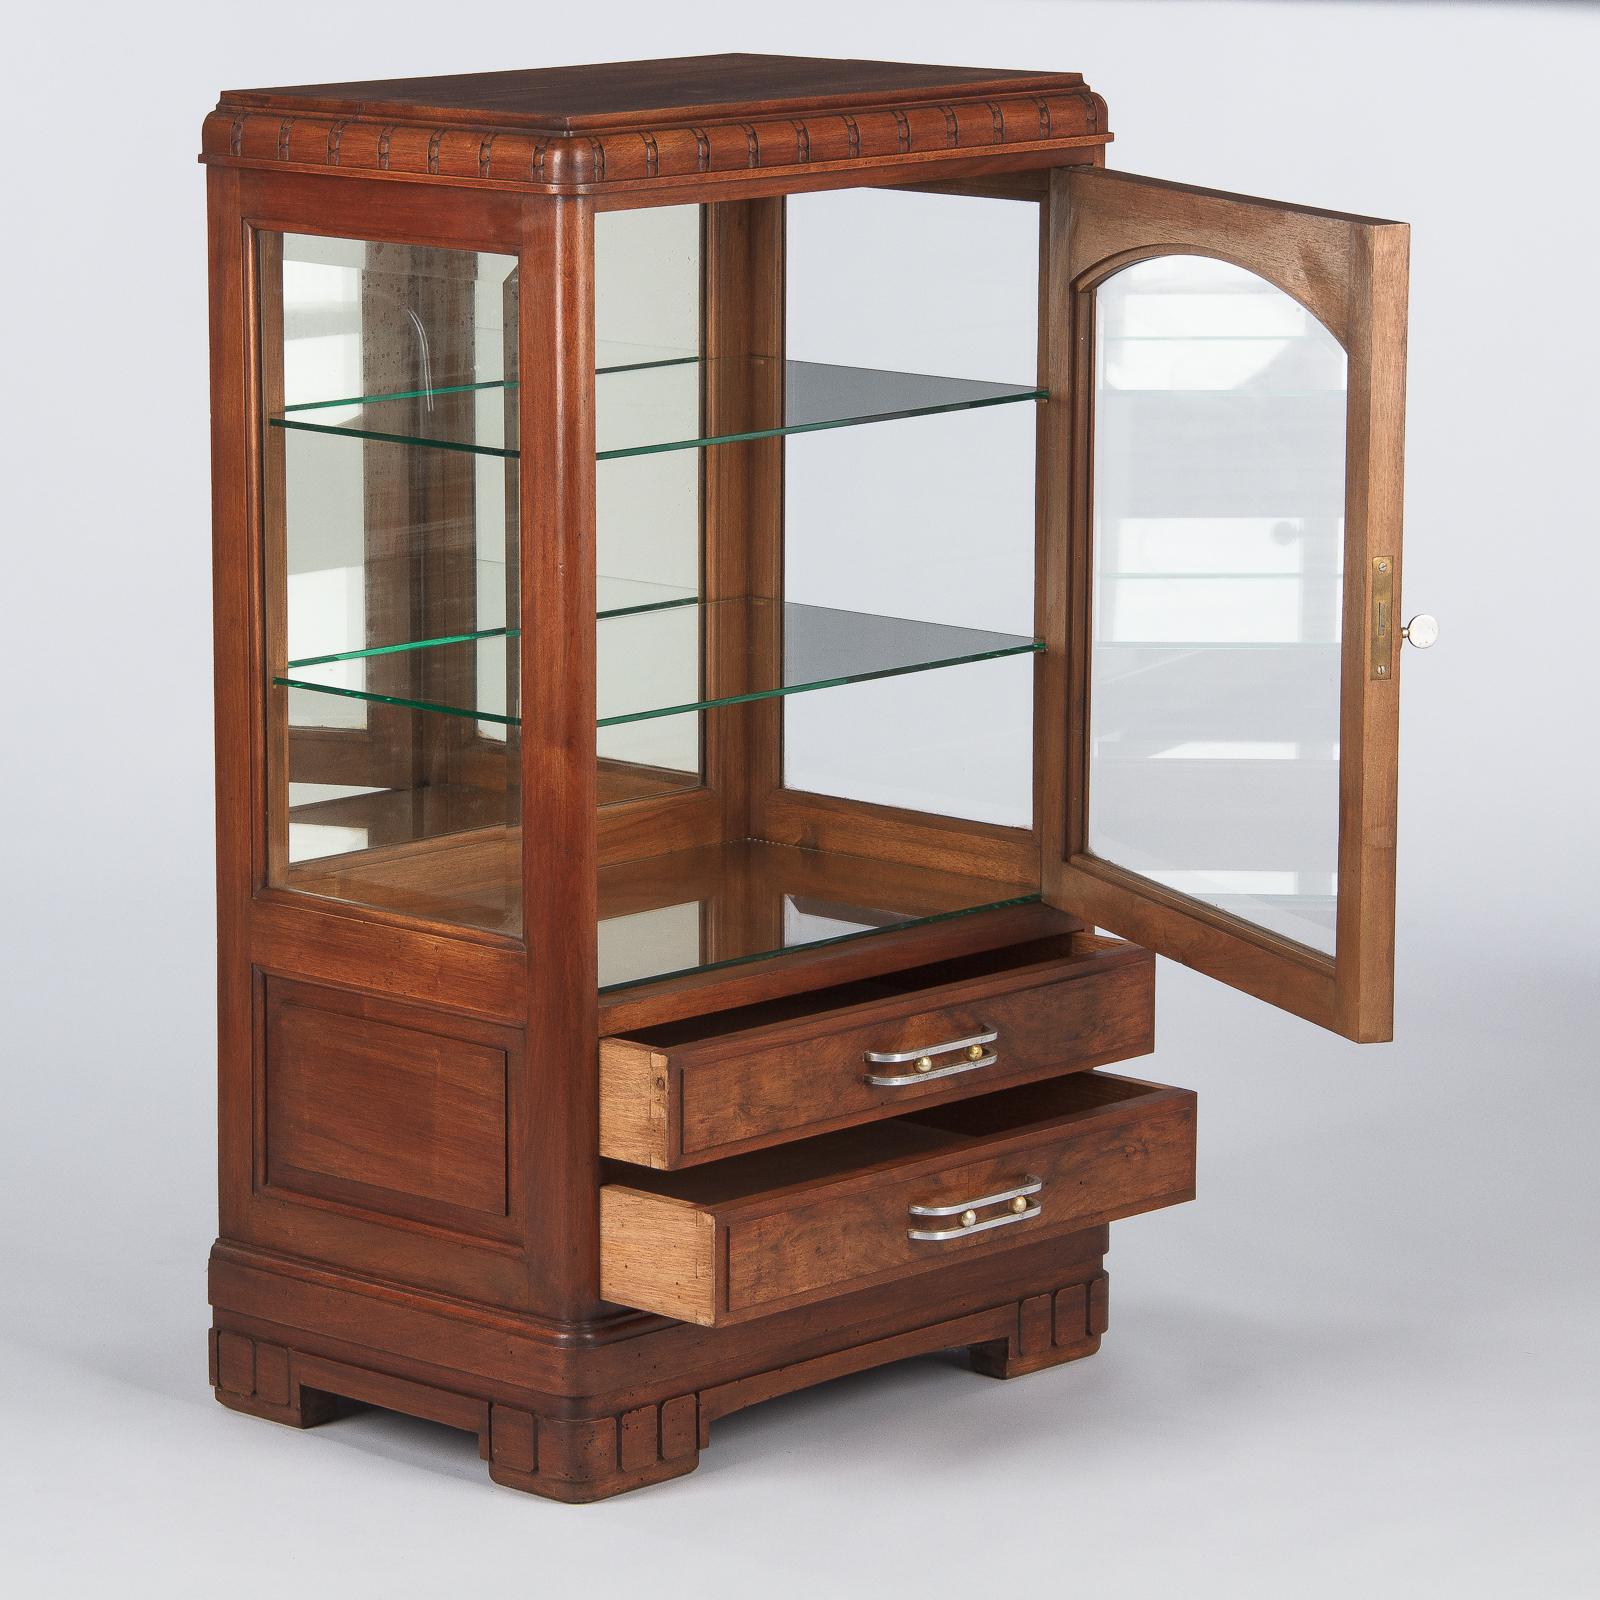 1930s glass display cabinet